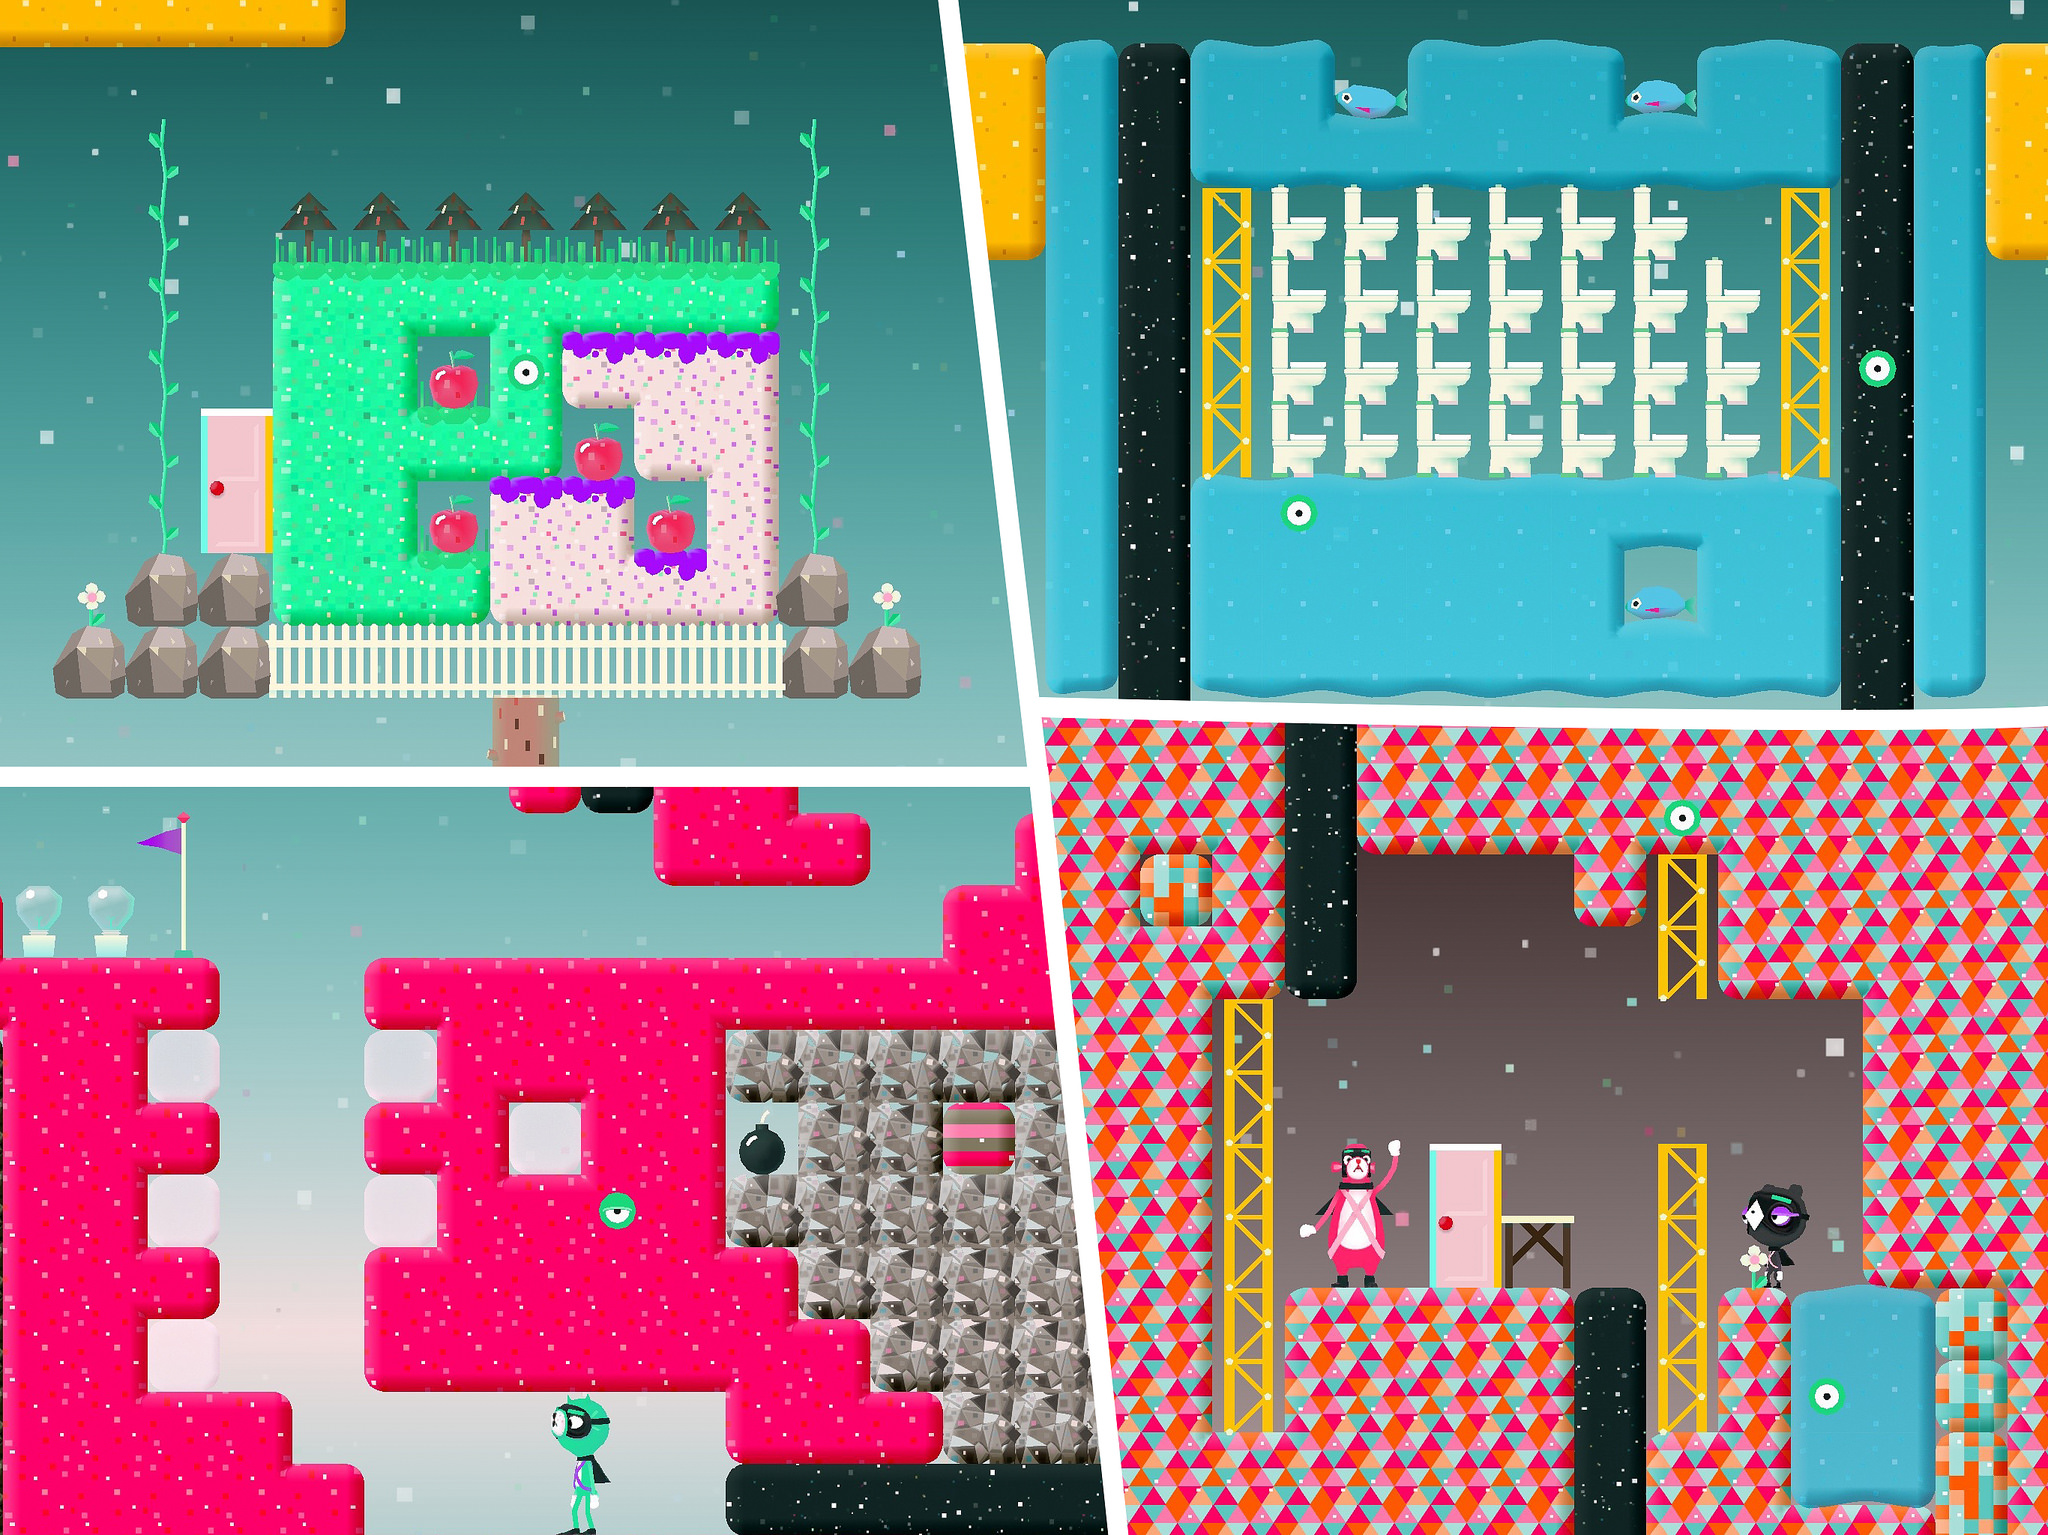 Yes, Toca Blocks has toilets (and something that looks like poo).